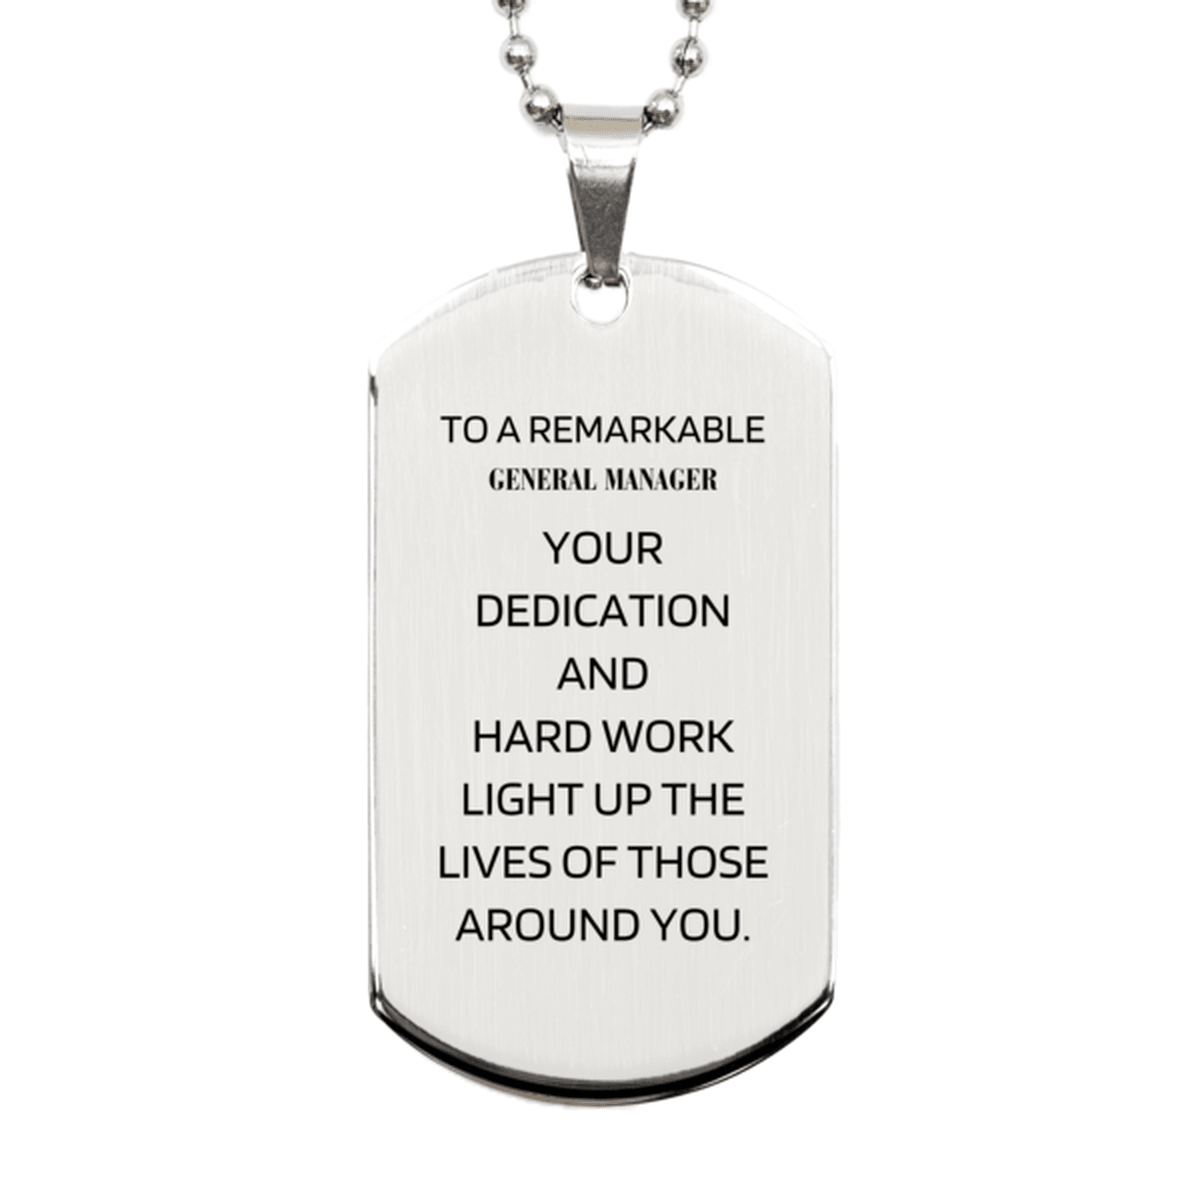 Remarkable General Manager Gifts, Your dedication and hard work, Inspirational Birthday Christmas Unique Silver Dog Tag For General Manager, Coworkers, Men, Women, Friends - Mallard Moon Gift Shop